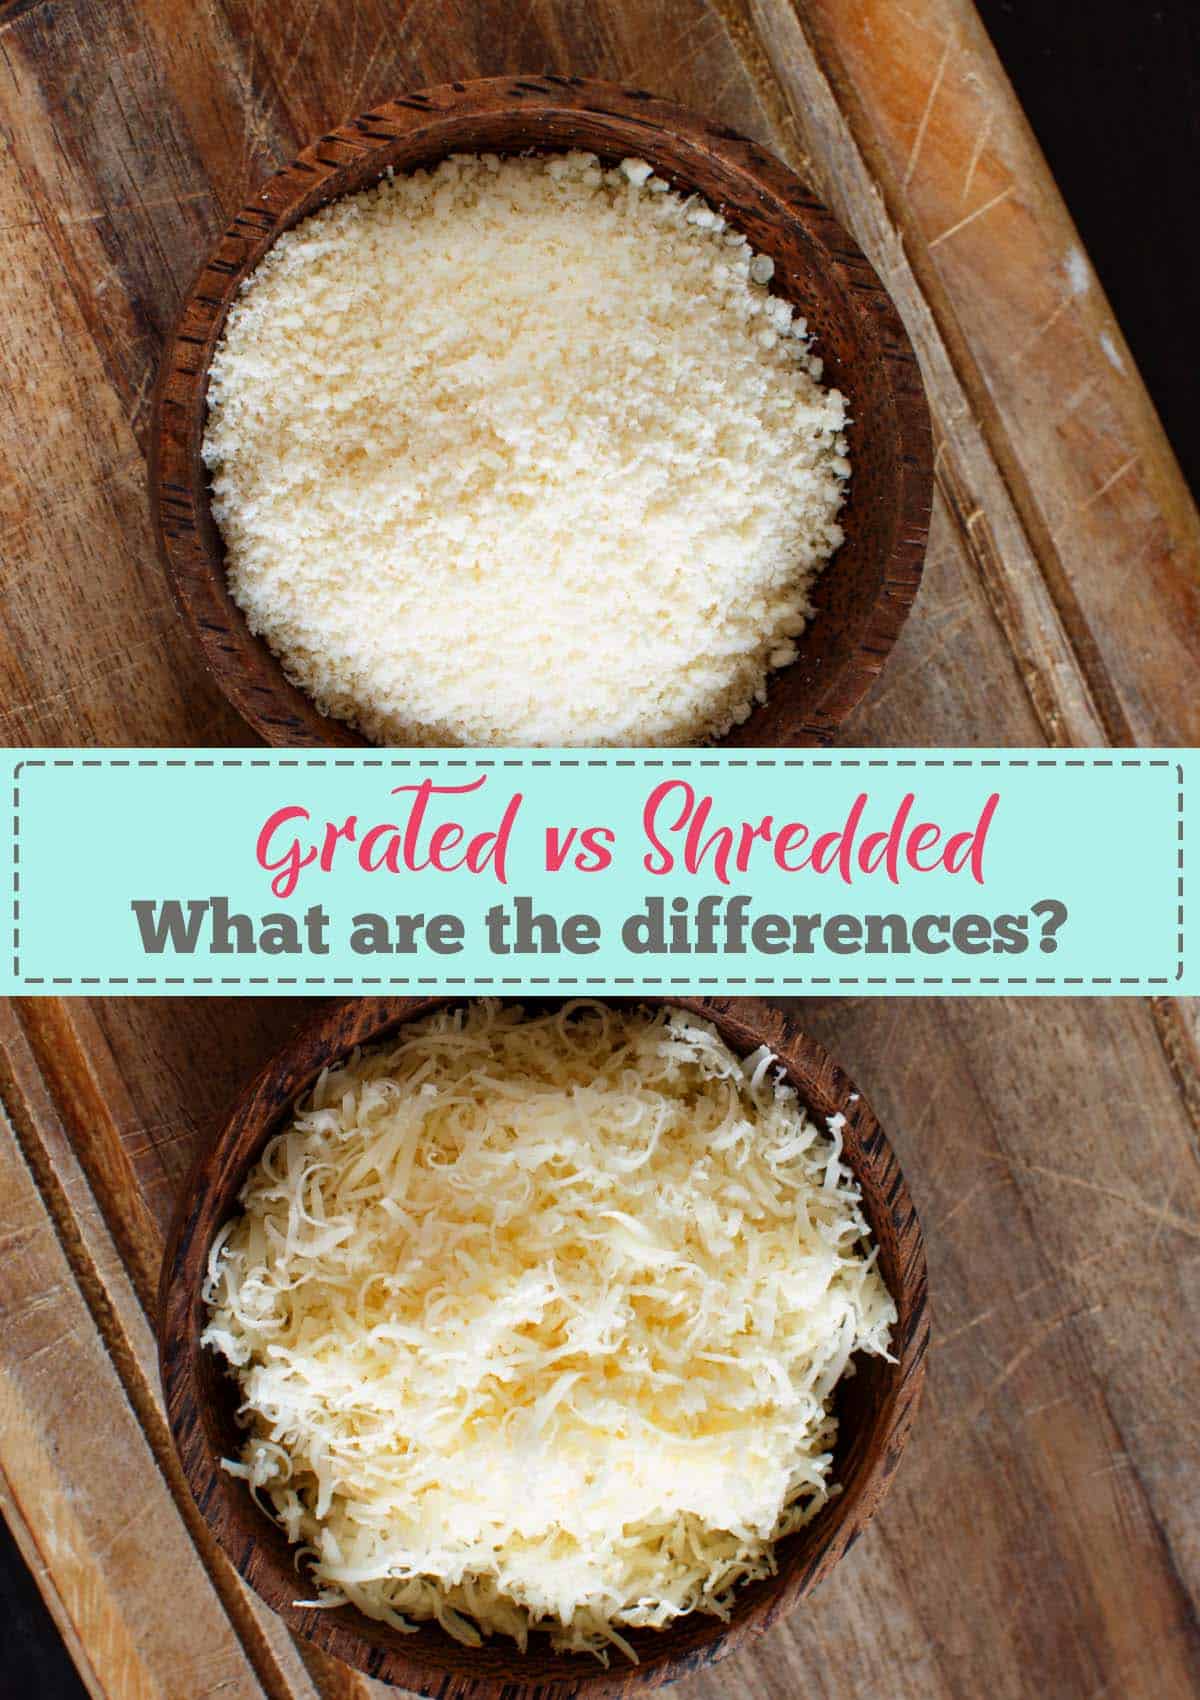 Let's explore the differences between grated and shredded ingredients, including their uses and applications in cooking and baking.